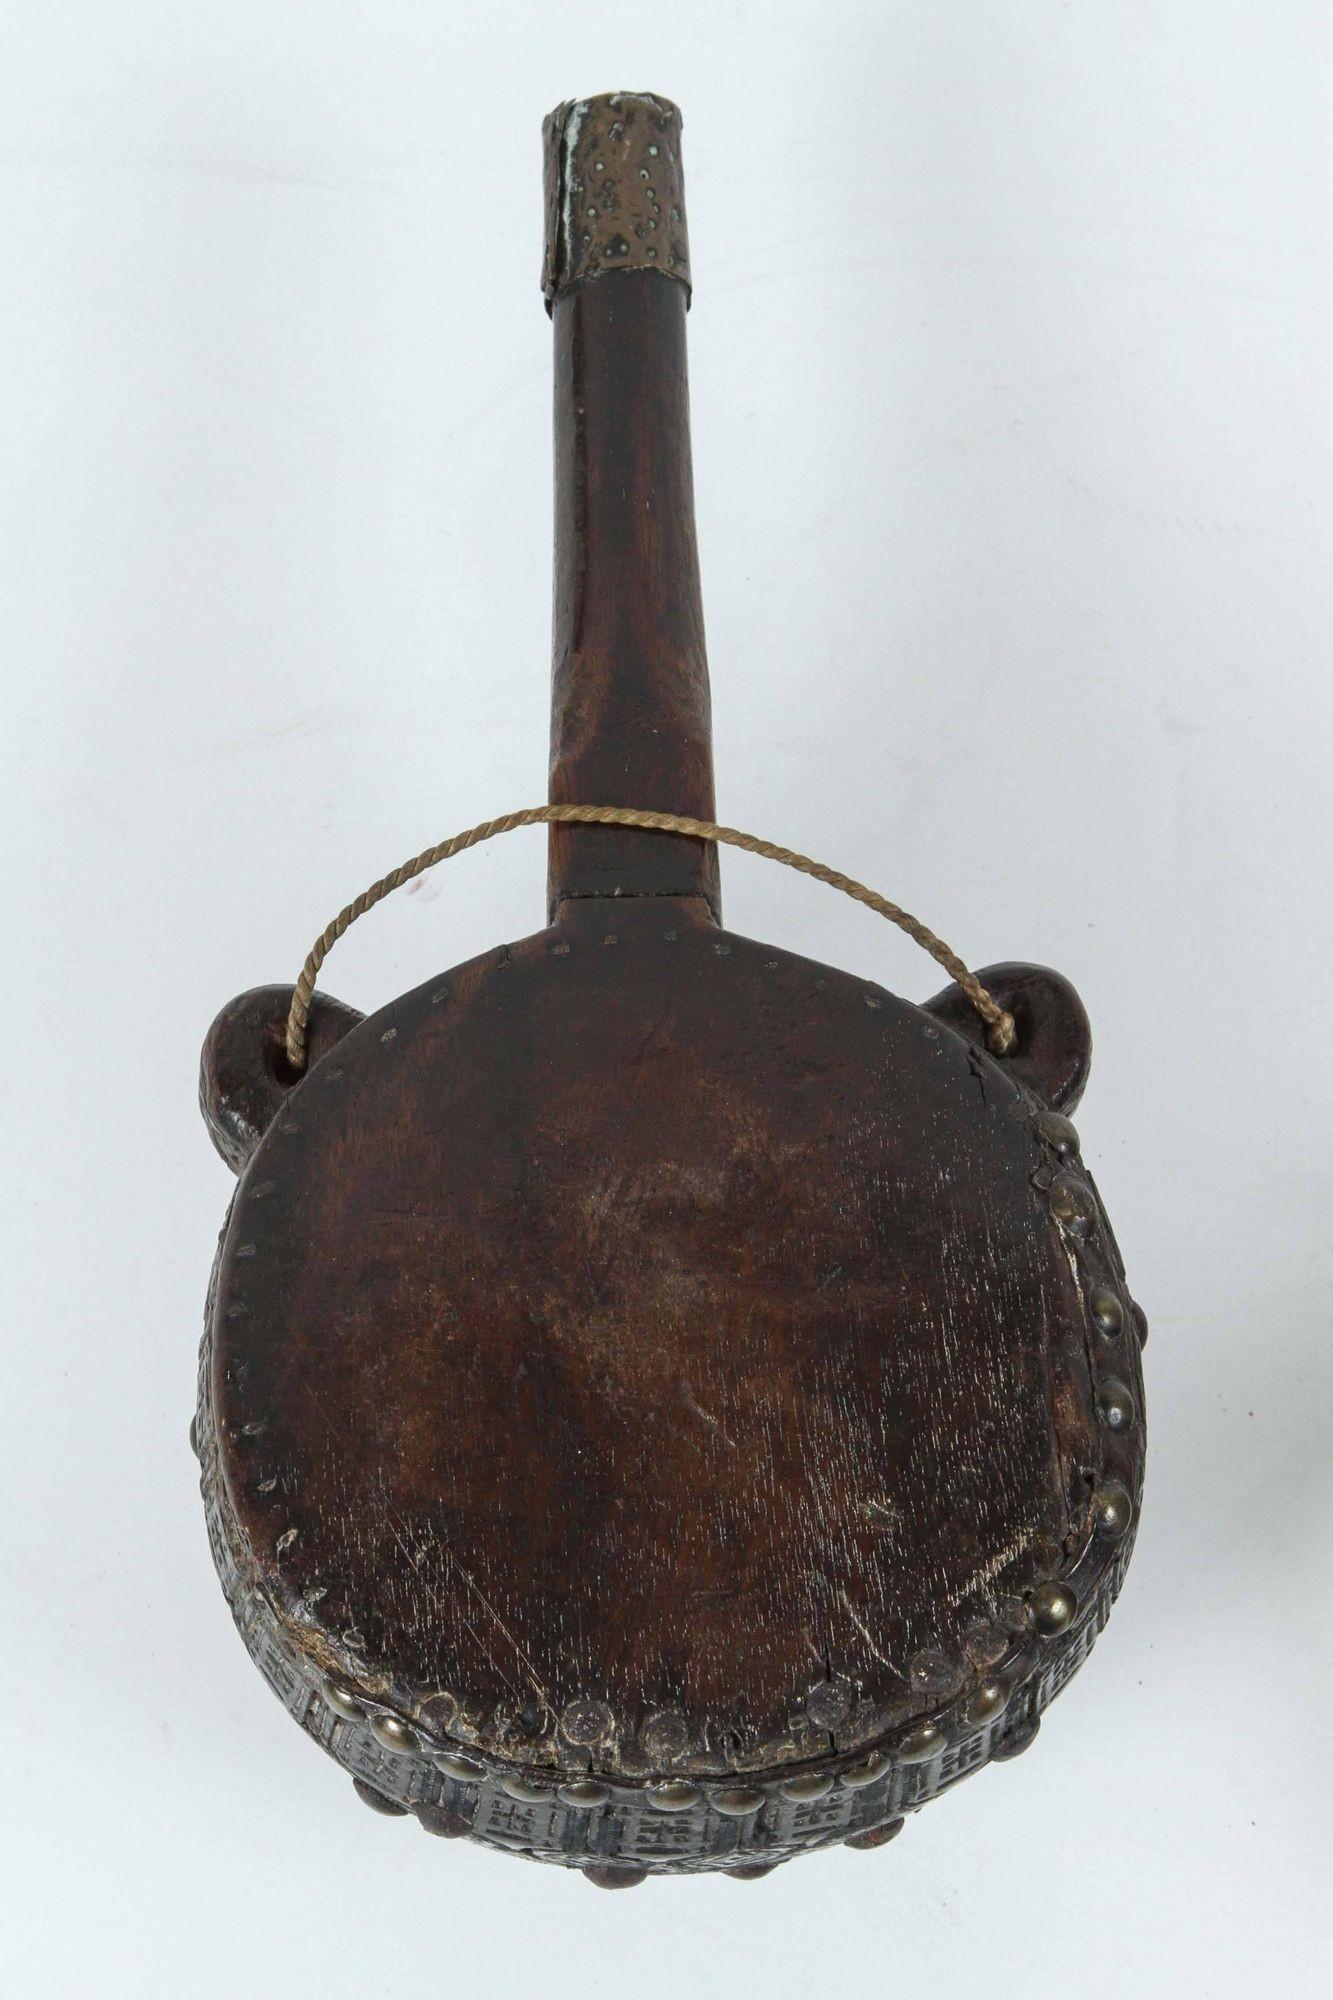 Moroccan tribal flask.
19th Century studded flasks finely engraved designs.
Collector flask in large carved wooden vessel with brass studded and leather covered.
Dimensions: 10